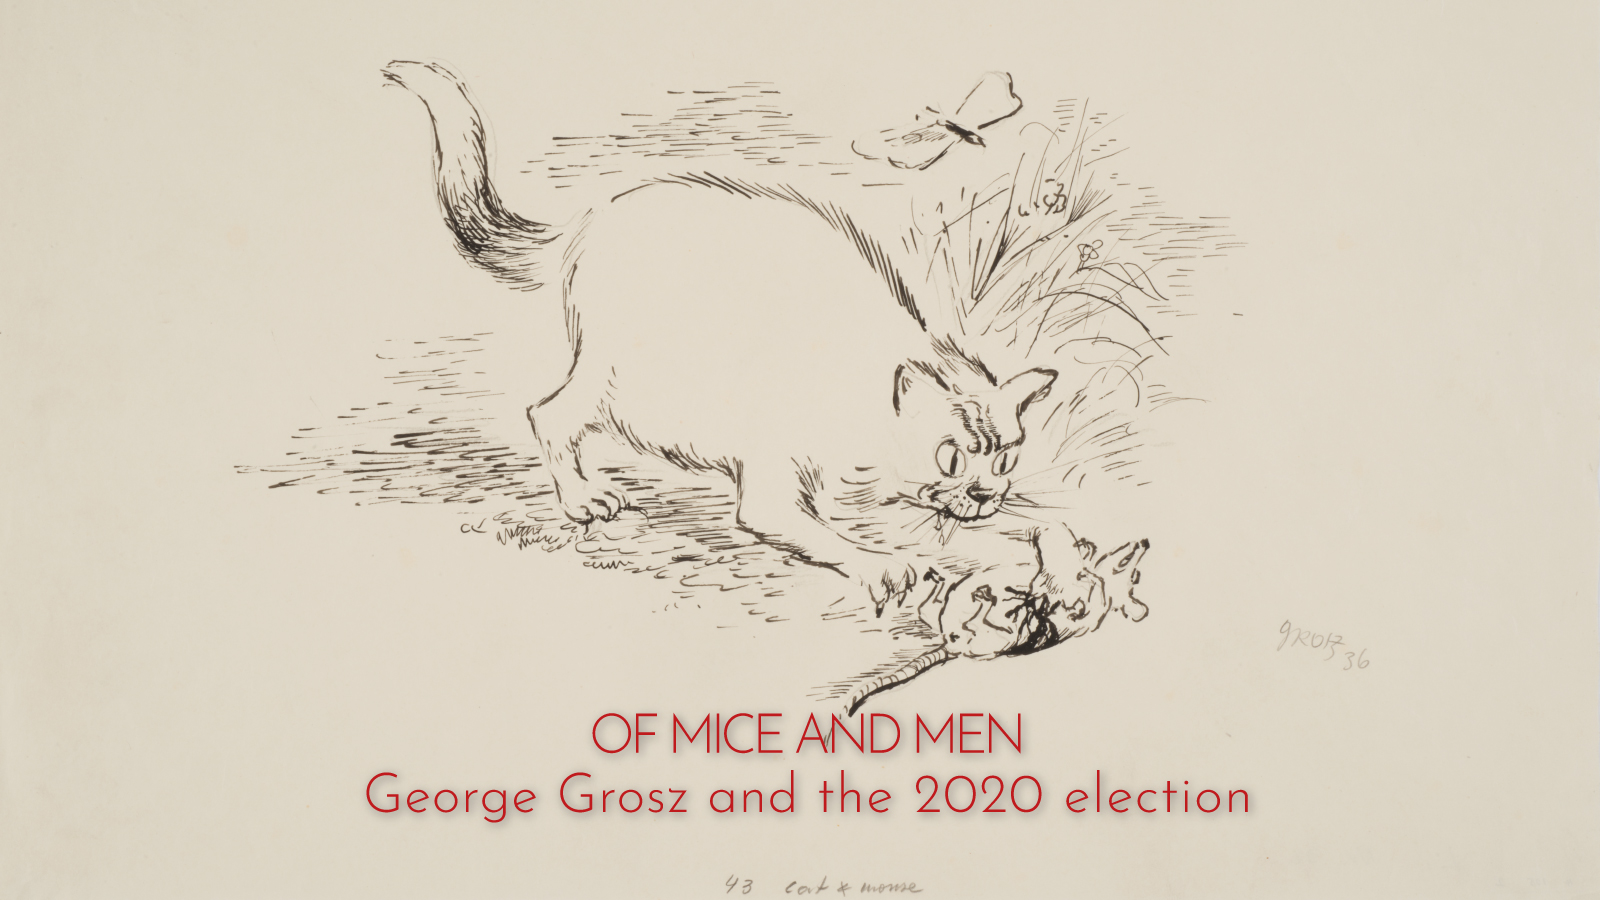 The Los Angeles exhibition {quote}Of mice and men: George Grosz and the 2020 election{quote} is the sequel to “Der Kandidat: George Grosz and the 2016 election{quote} held in Berlin exactly four years ago.THEASTER GATES   GEORGE GROSZ   CLIFF JOSEPH  PAUL McCARTHY   STERLING RUBYRead about it here